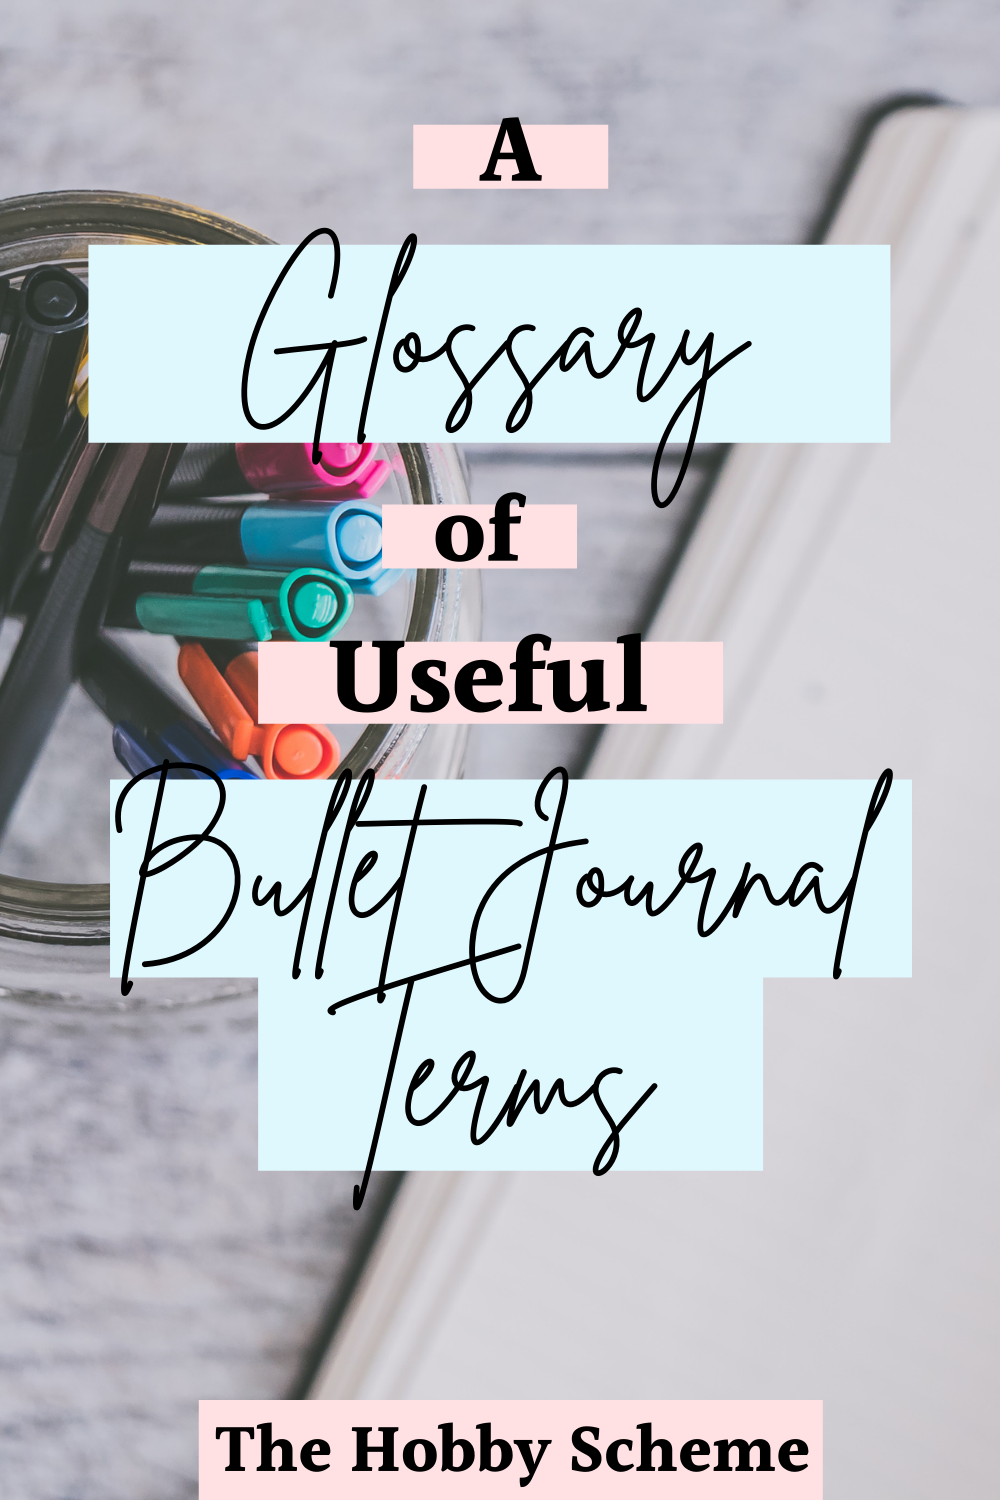 A Glossary of Useful Bullet Journal Terms